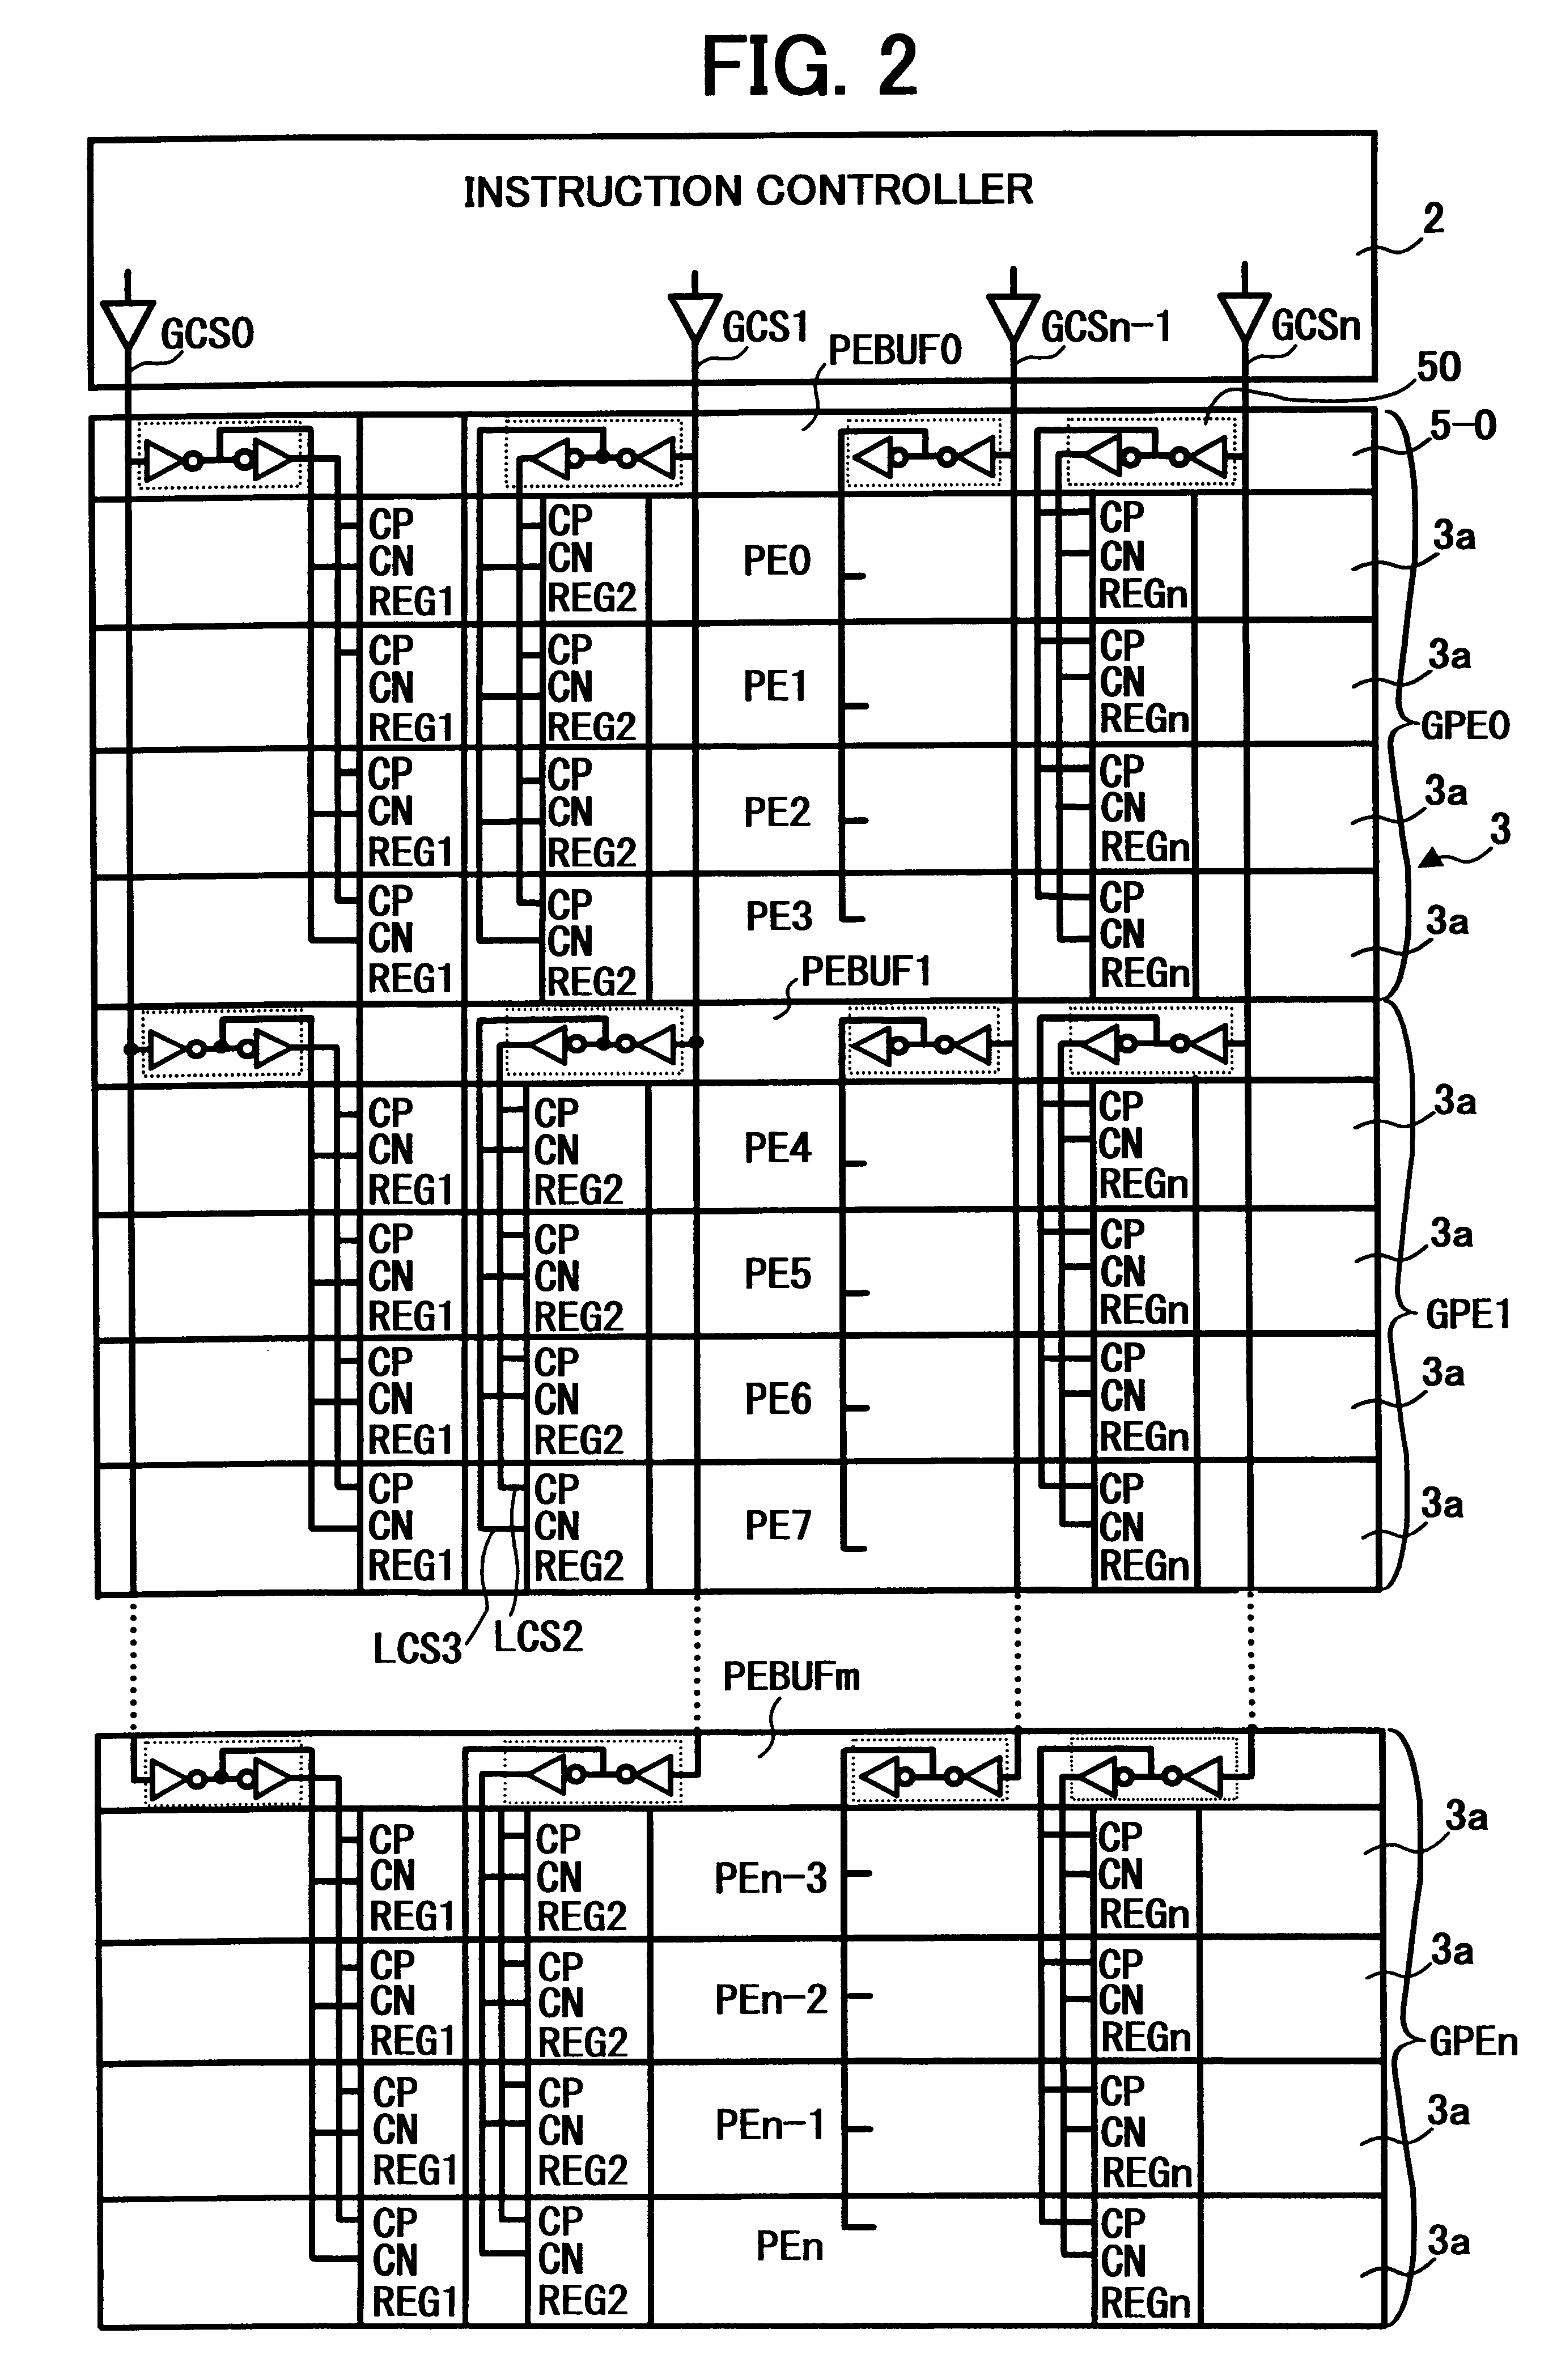 Parallel processor and image processing system for simultaneous processing of plural image data items without additional circuit delays and power increases